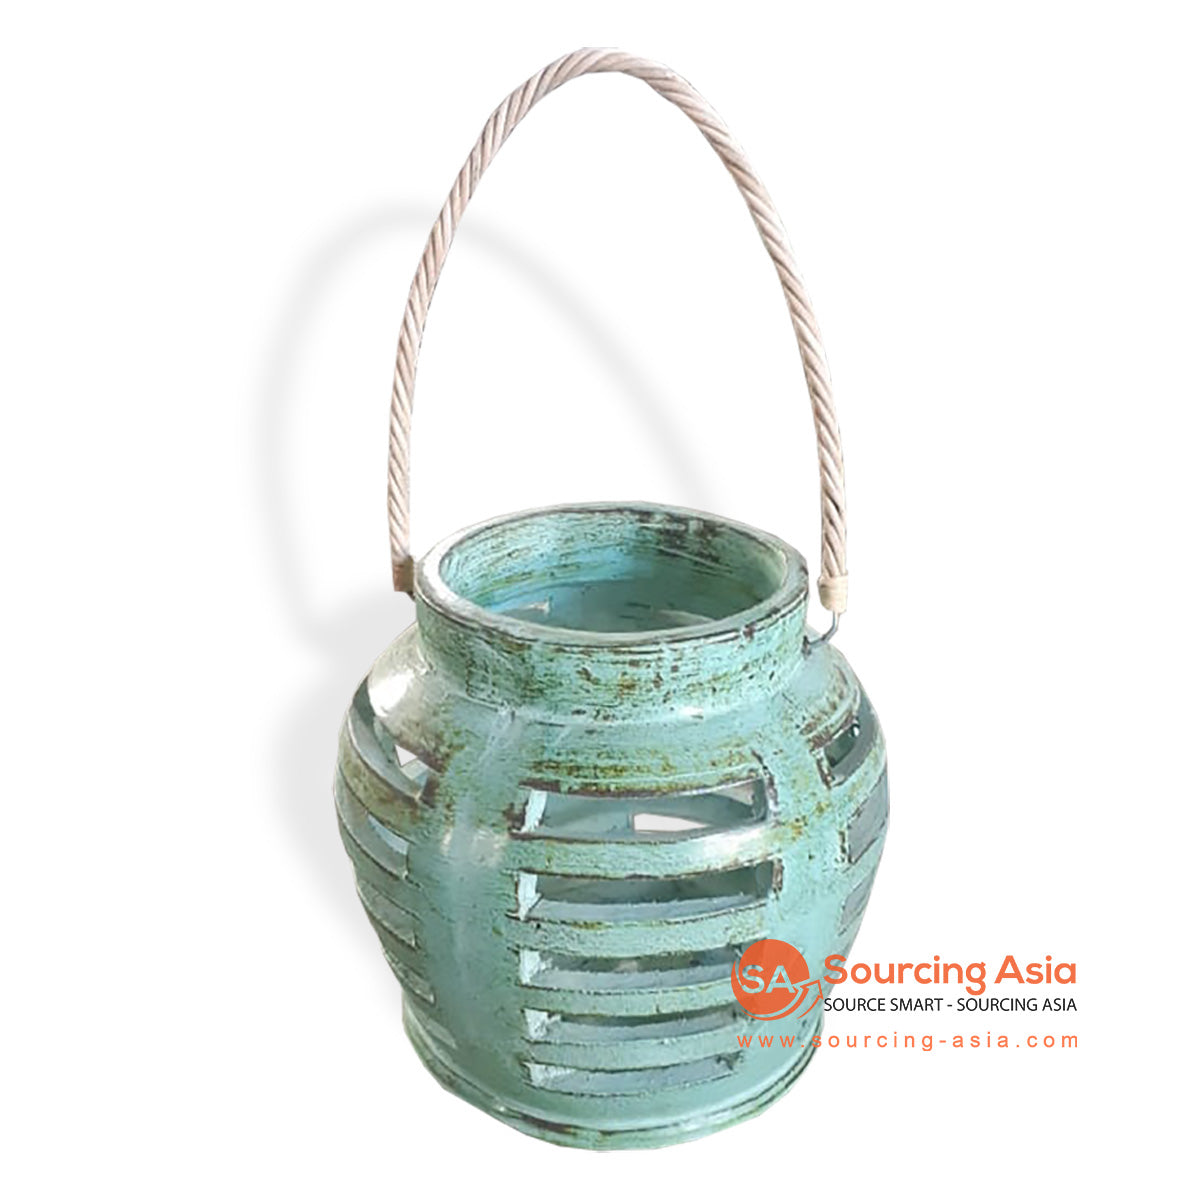 JNP238-KY23 GREEN KY23 TERRACOTTA HANGING CANDLE HOLDER